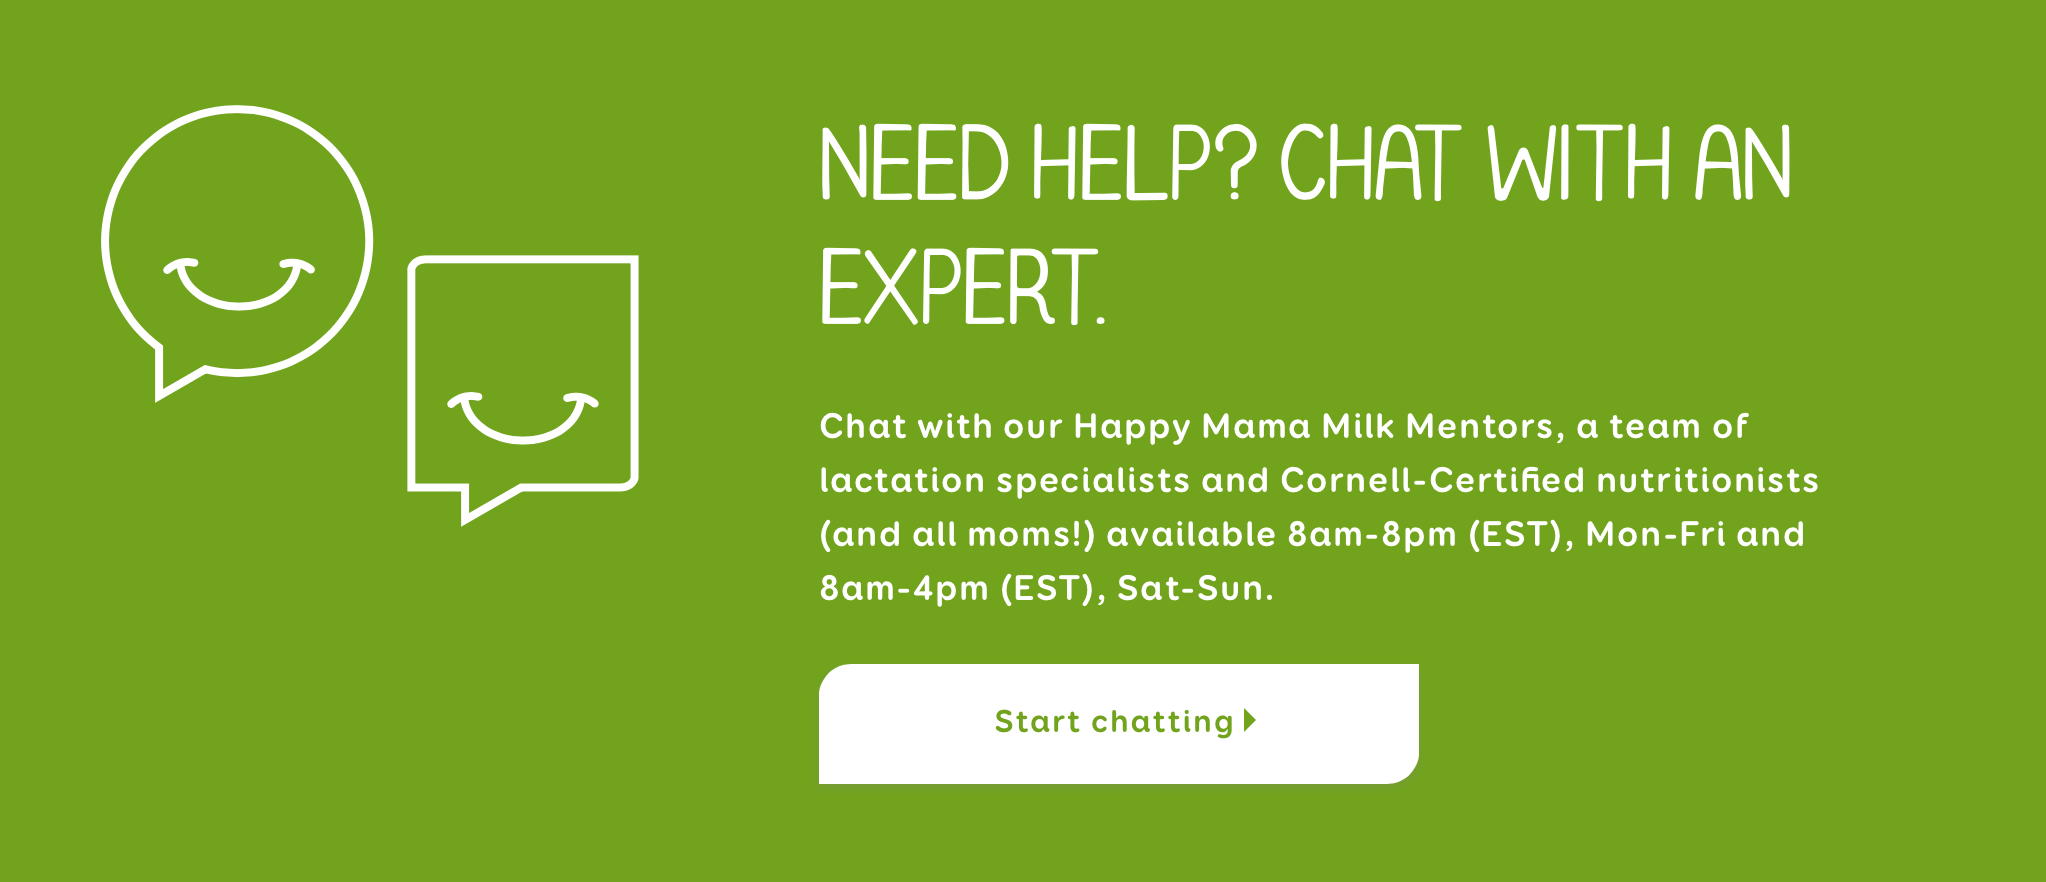 Help Feeding A Picky Eater || Happy Mama Mentor Chat www.Embellishmints.com